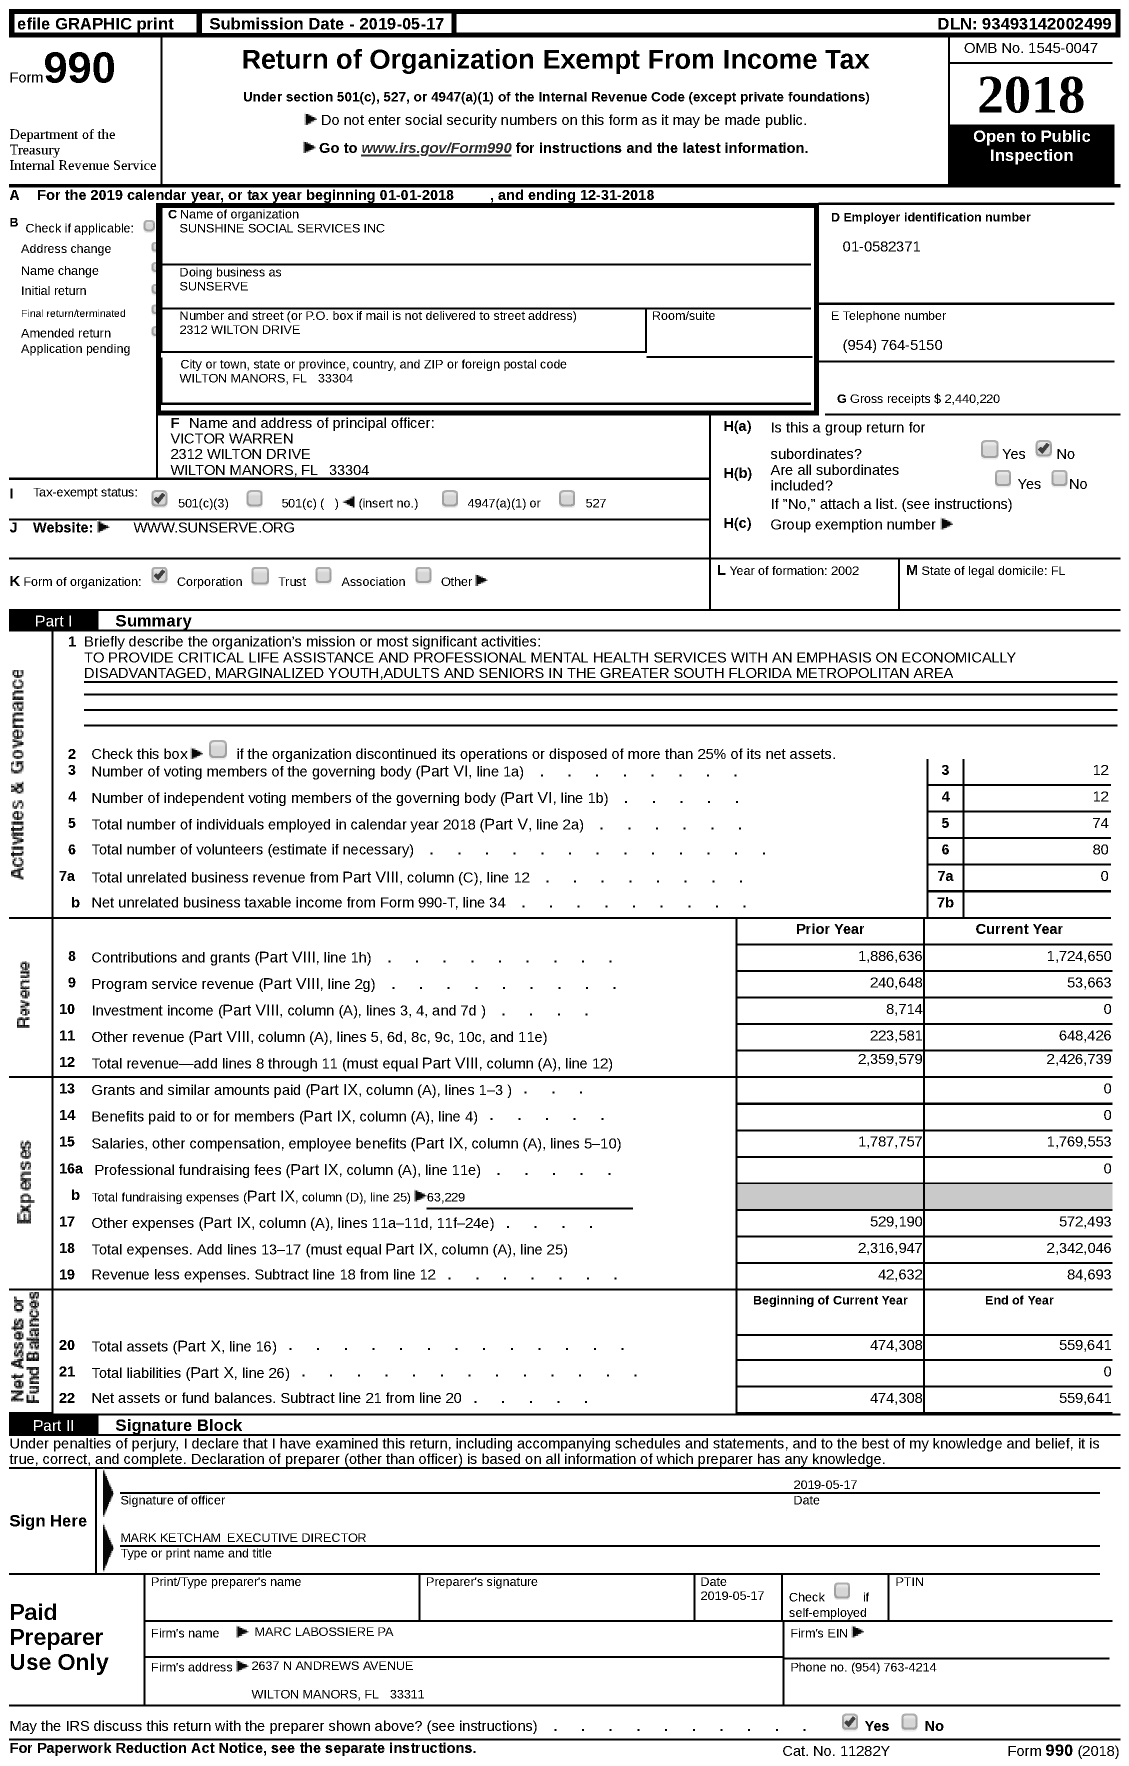 Image of first page of 2018 Form 990 for SunServe